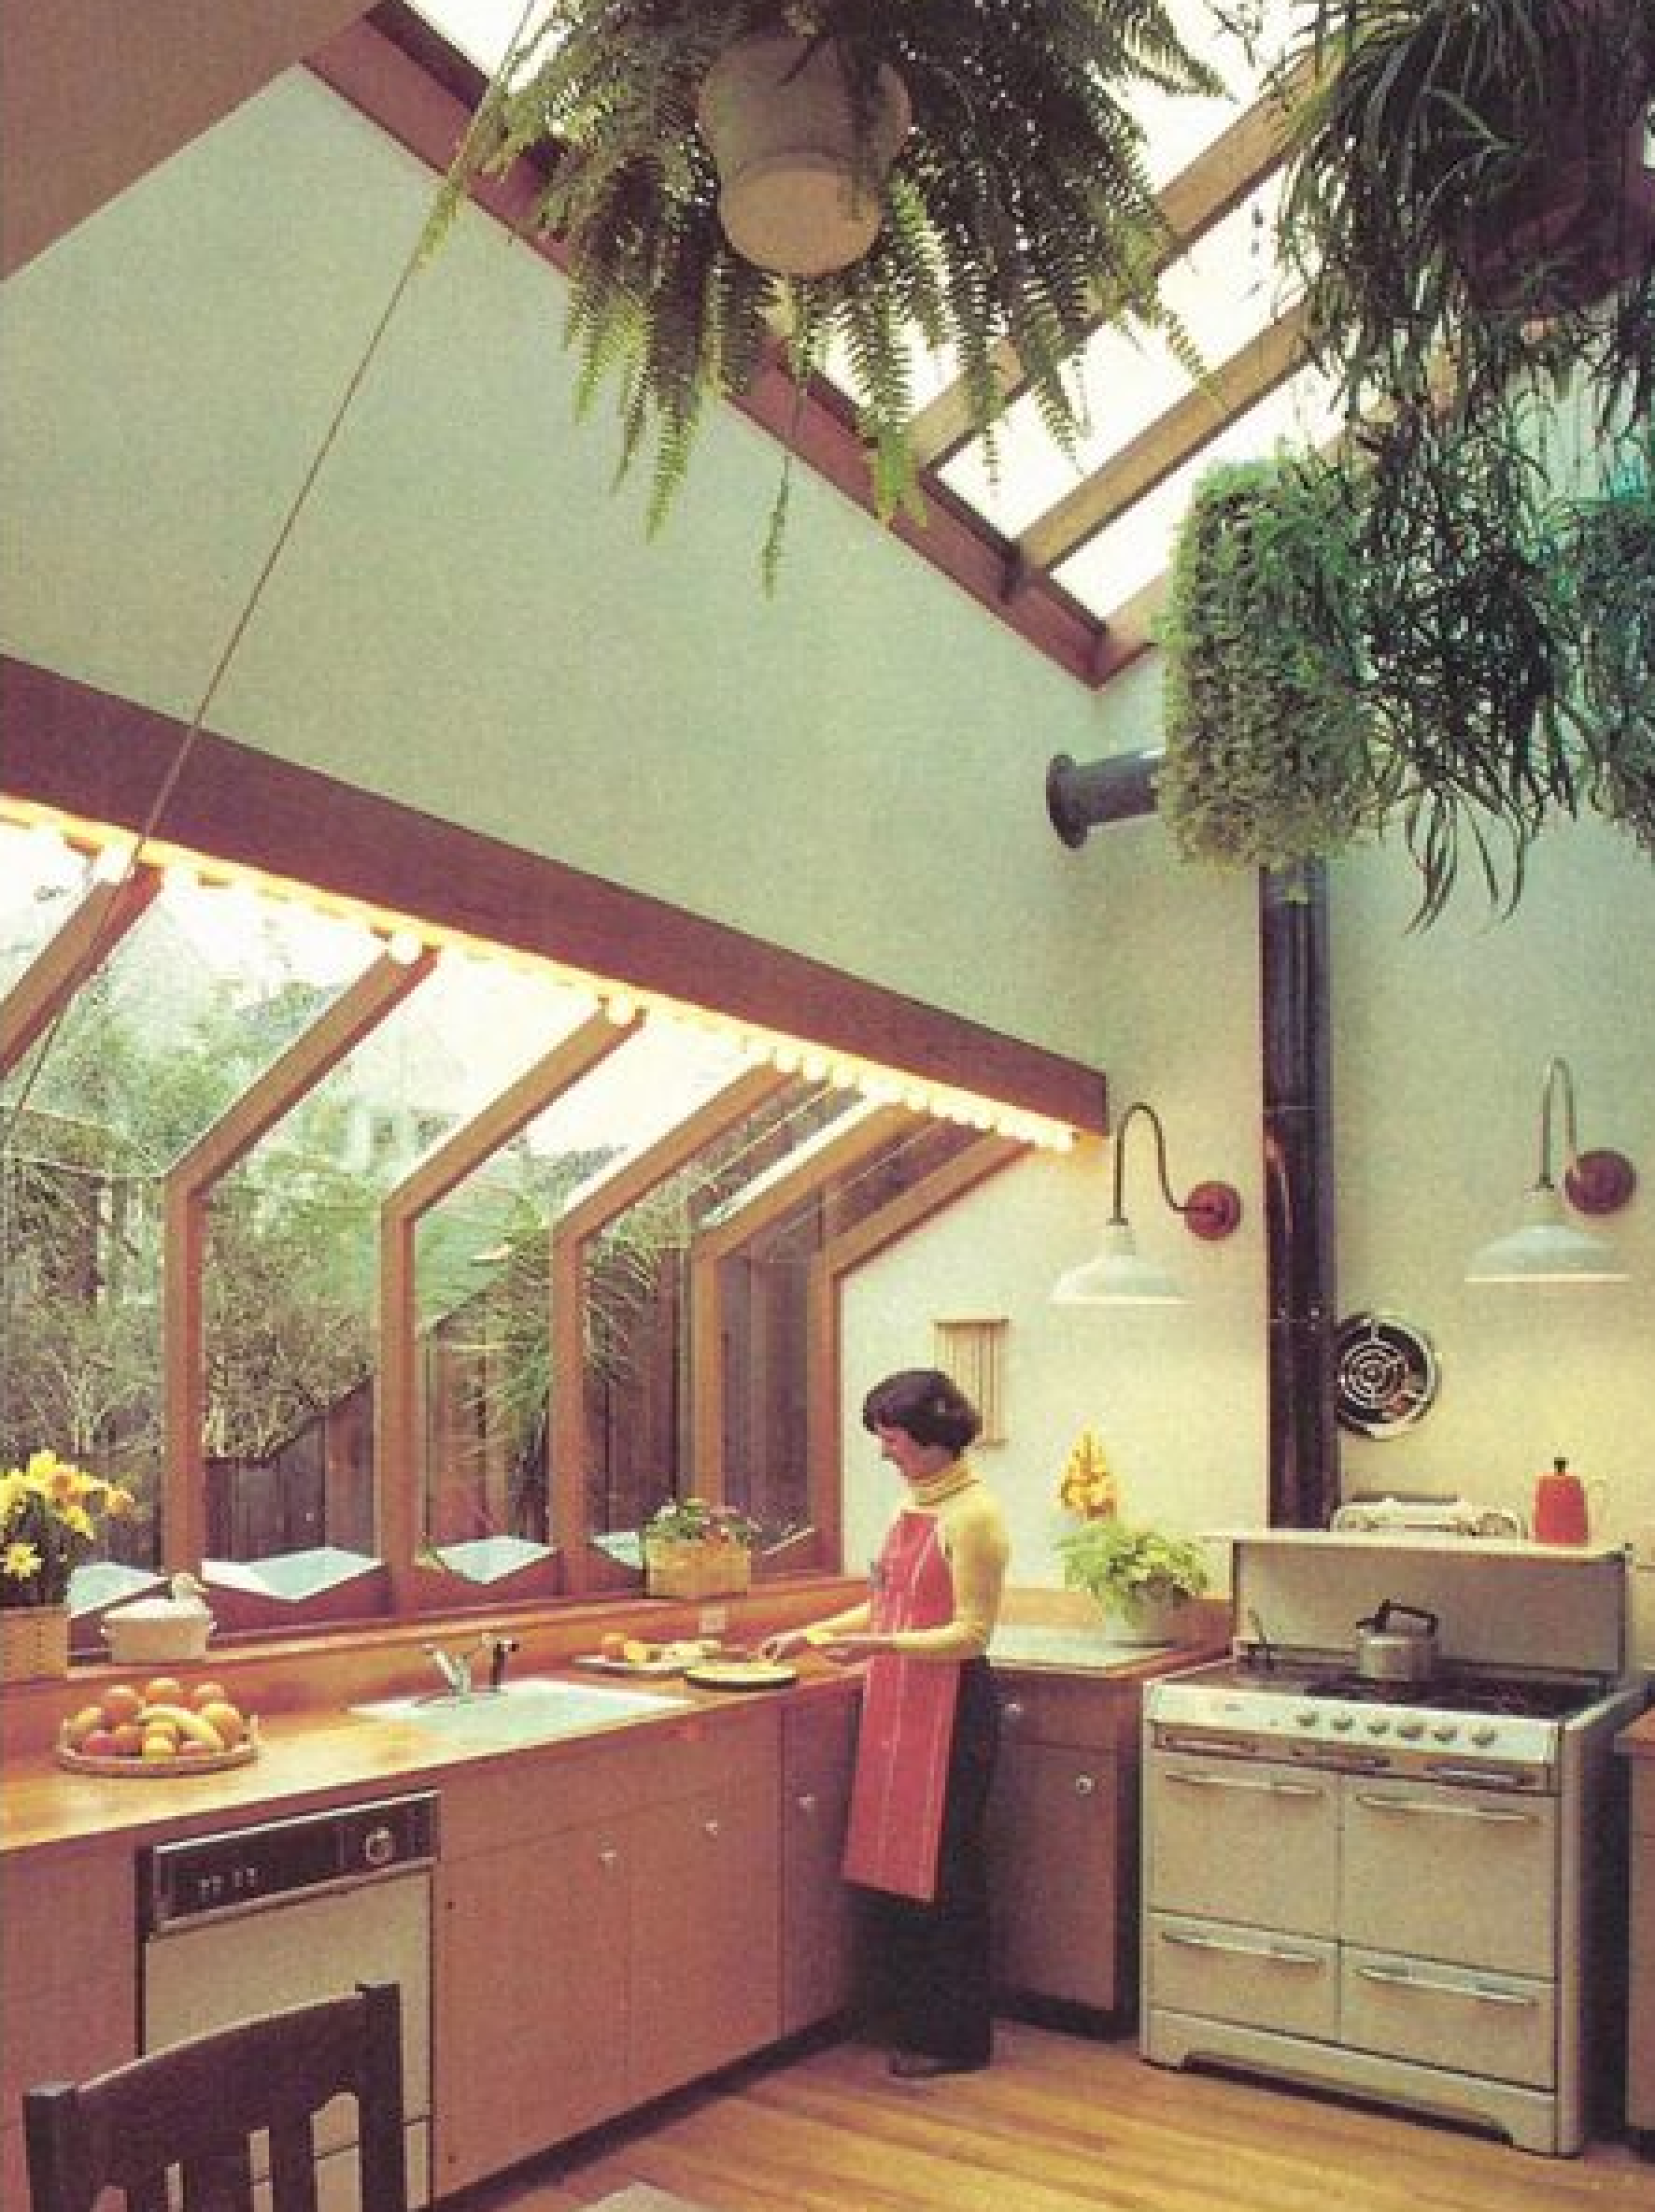 A woman is placing fruits on a plate in a 1980s design kitchen with green plants decoration at the celling.